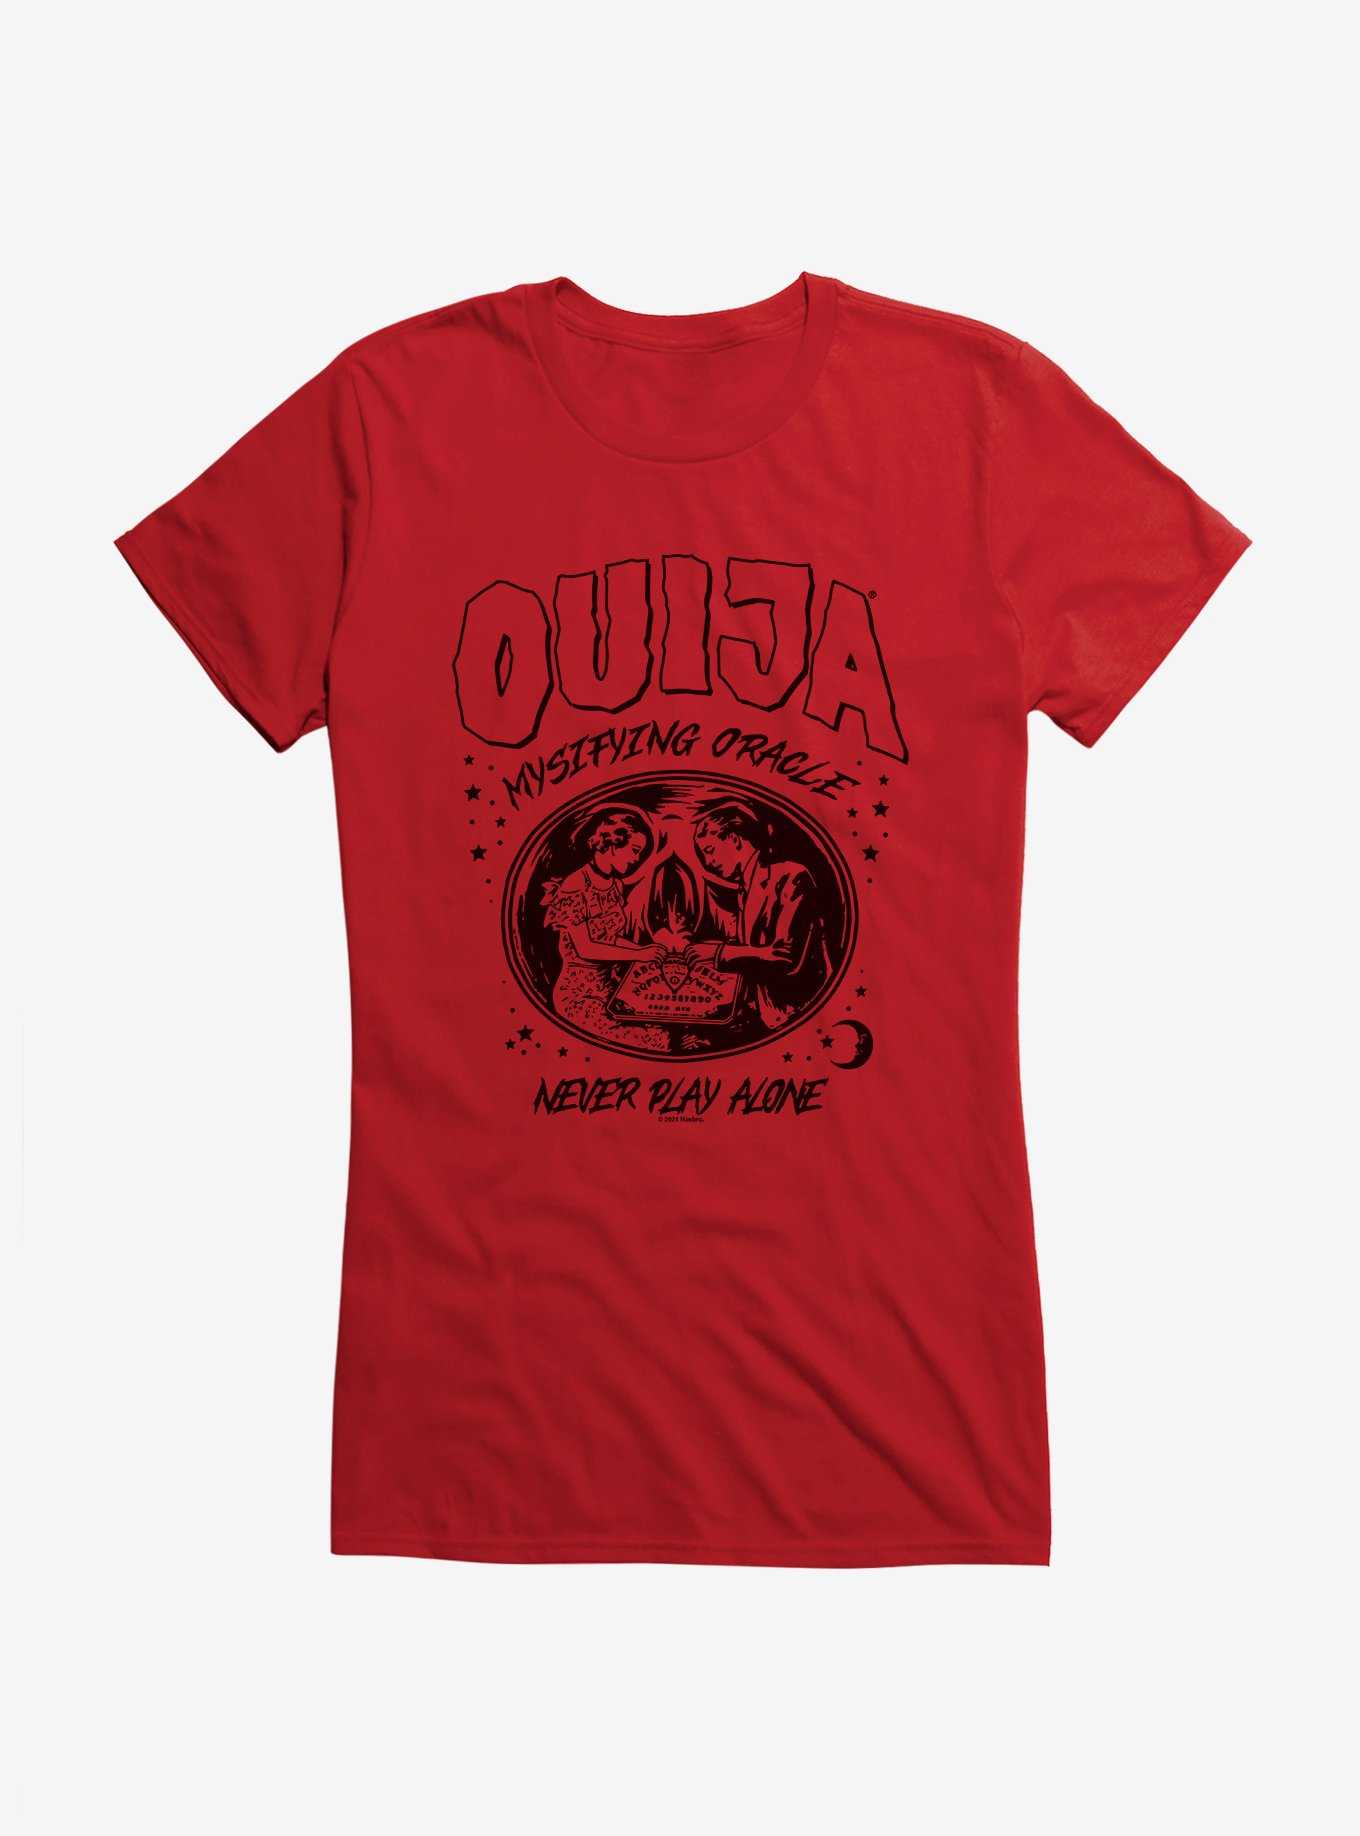 Ouija Game Never Play Alone Girls T-Shirt, , hi-res